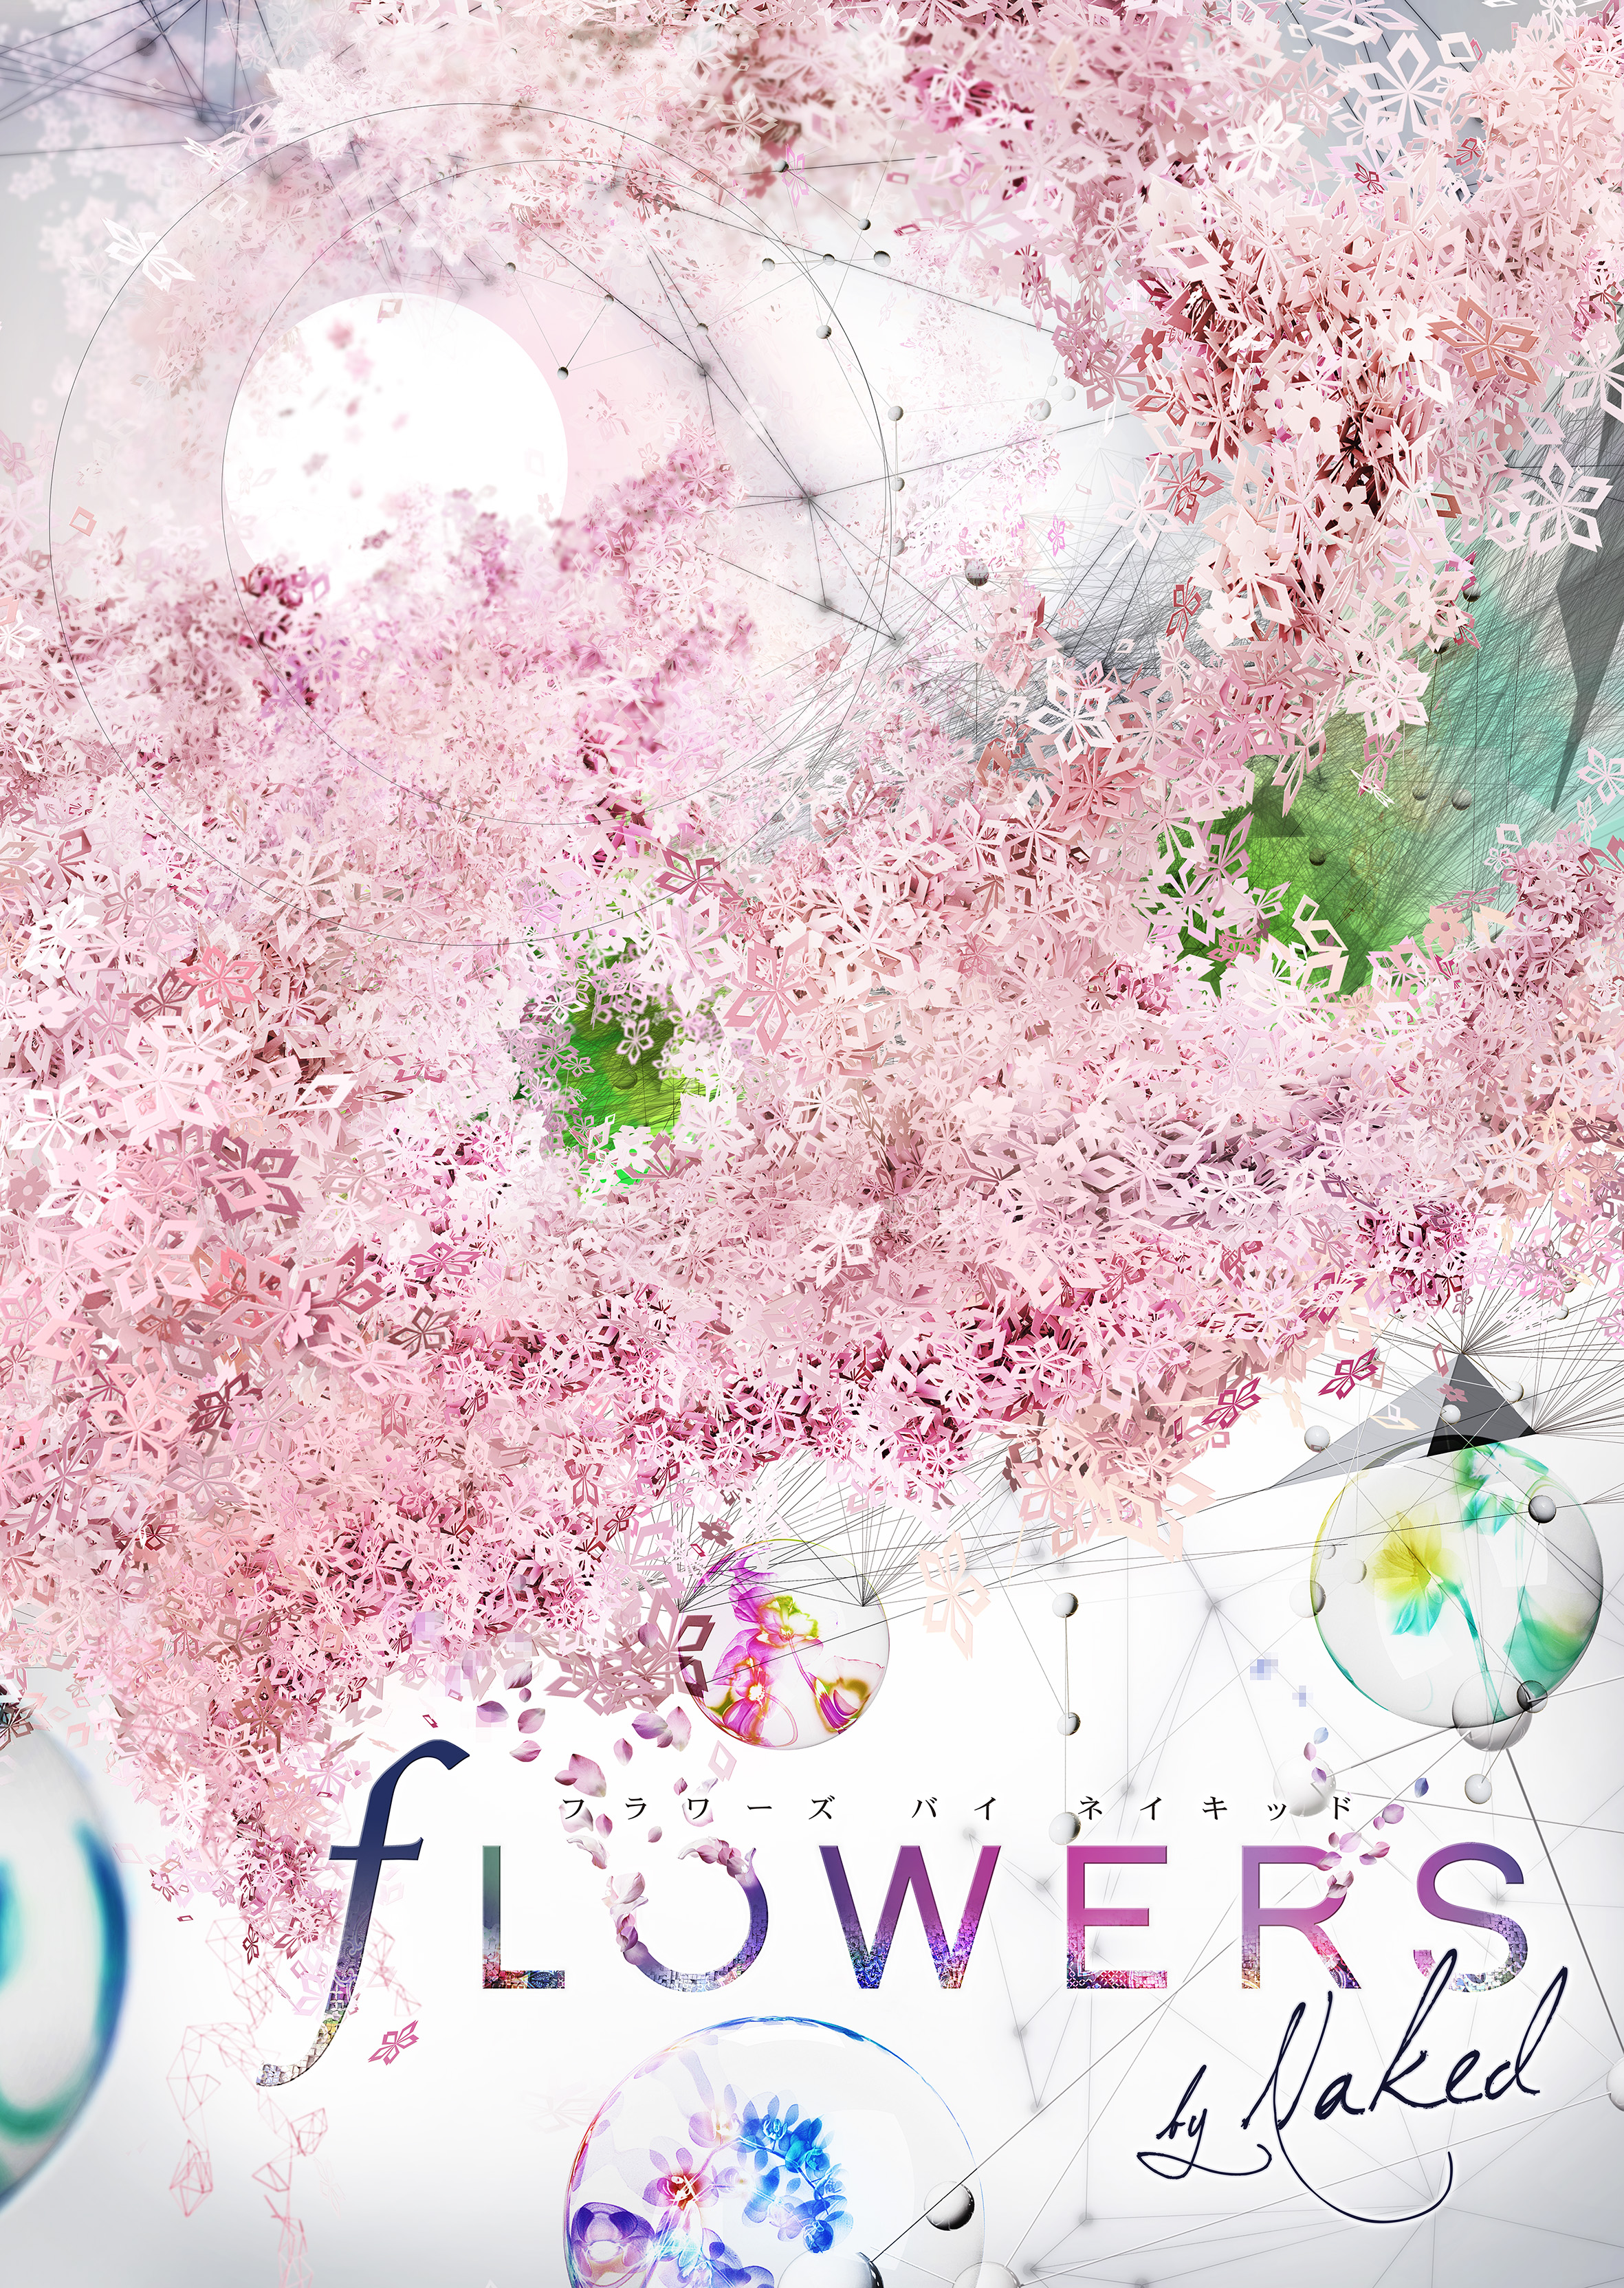 『FLOWERS by NAKED』が日本橋に帰ってくるーー NAKED FLOWERS 2021 −桜− 世界遺産・二条城